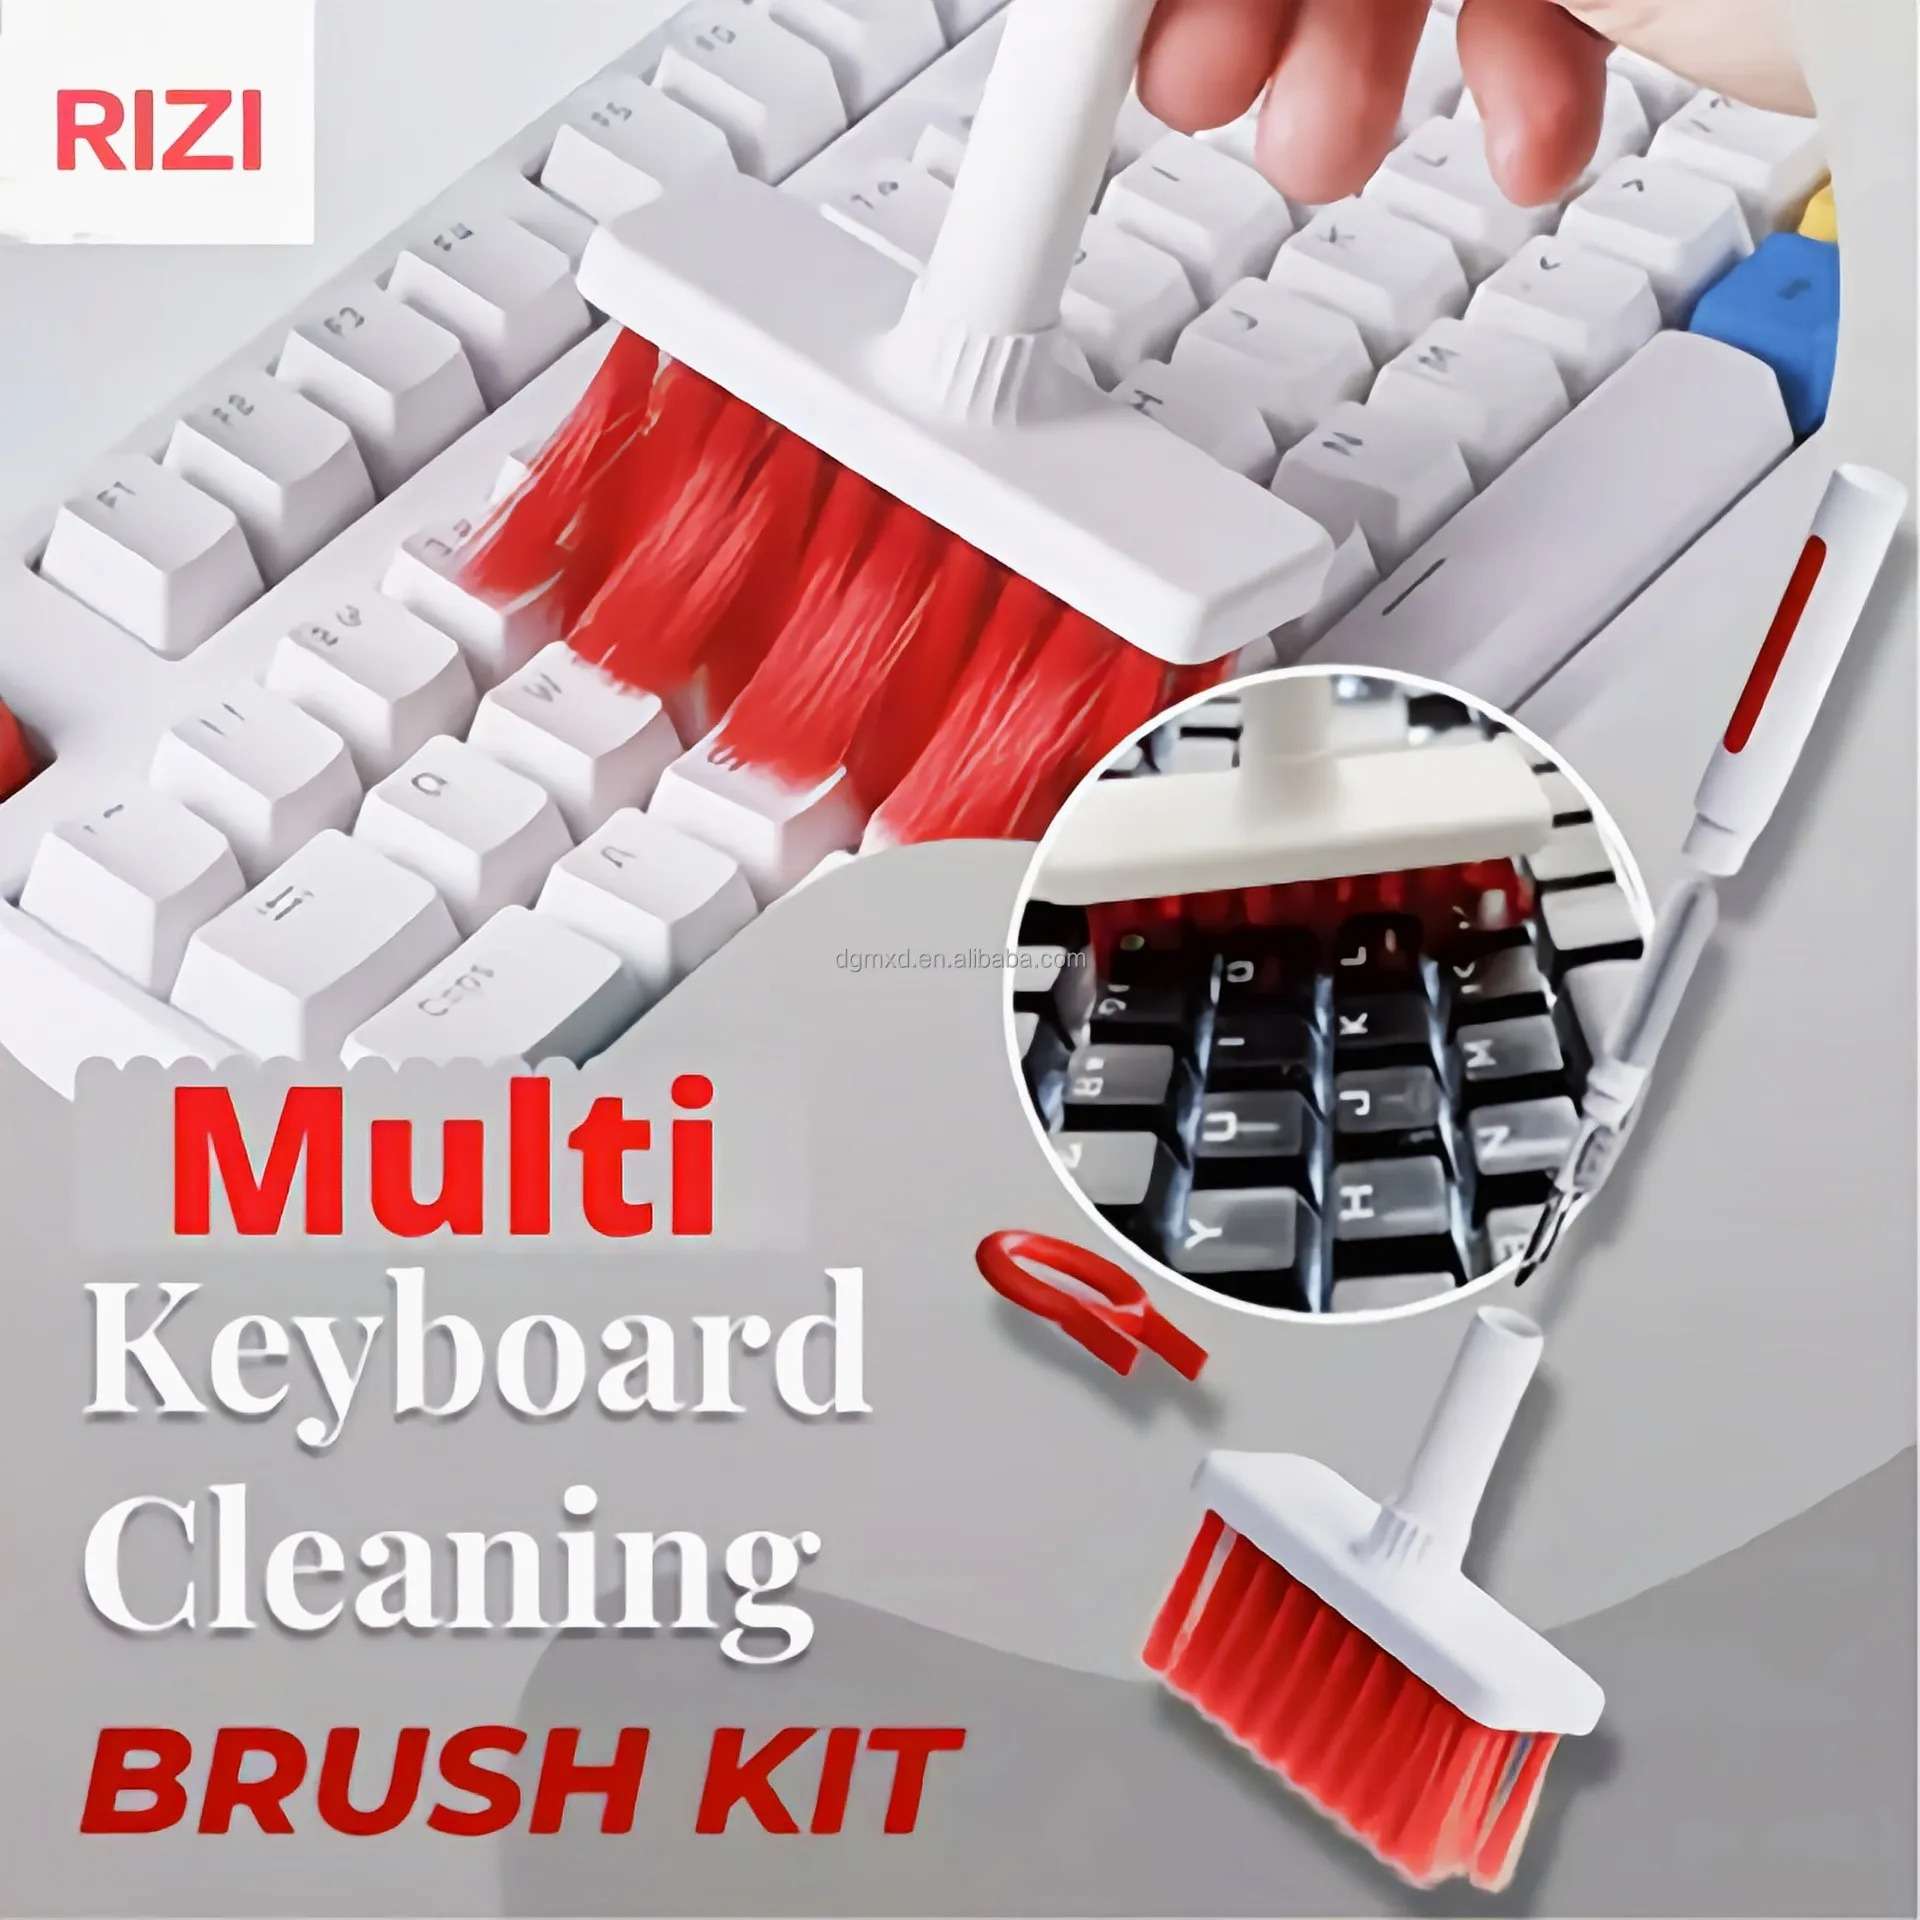 Keyboard Earphone Cleaning Tools Kit including brush